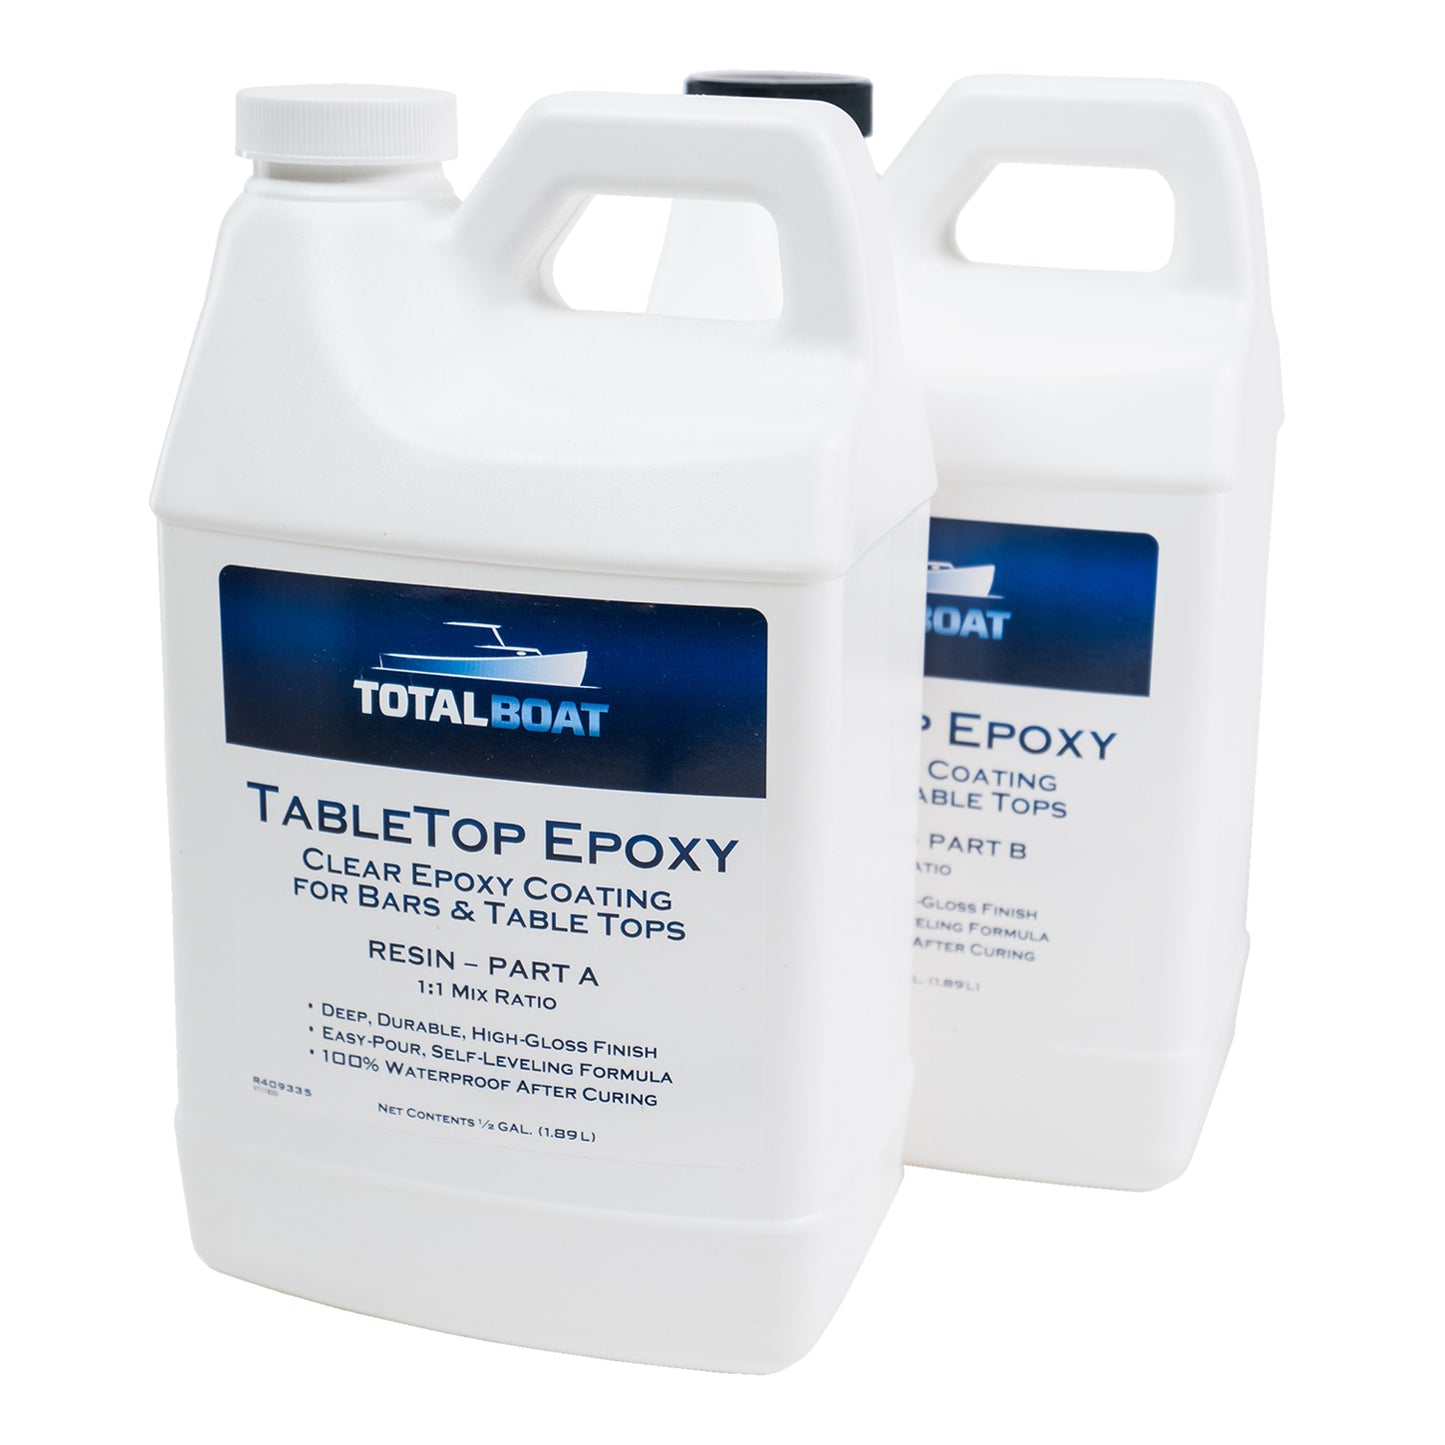 SuperClear Premium Epoxy Resin Crystal Clear for Superior Wood Tables and River Tables - 1 Gallon 2 Part Epoxy Resin Kit